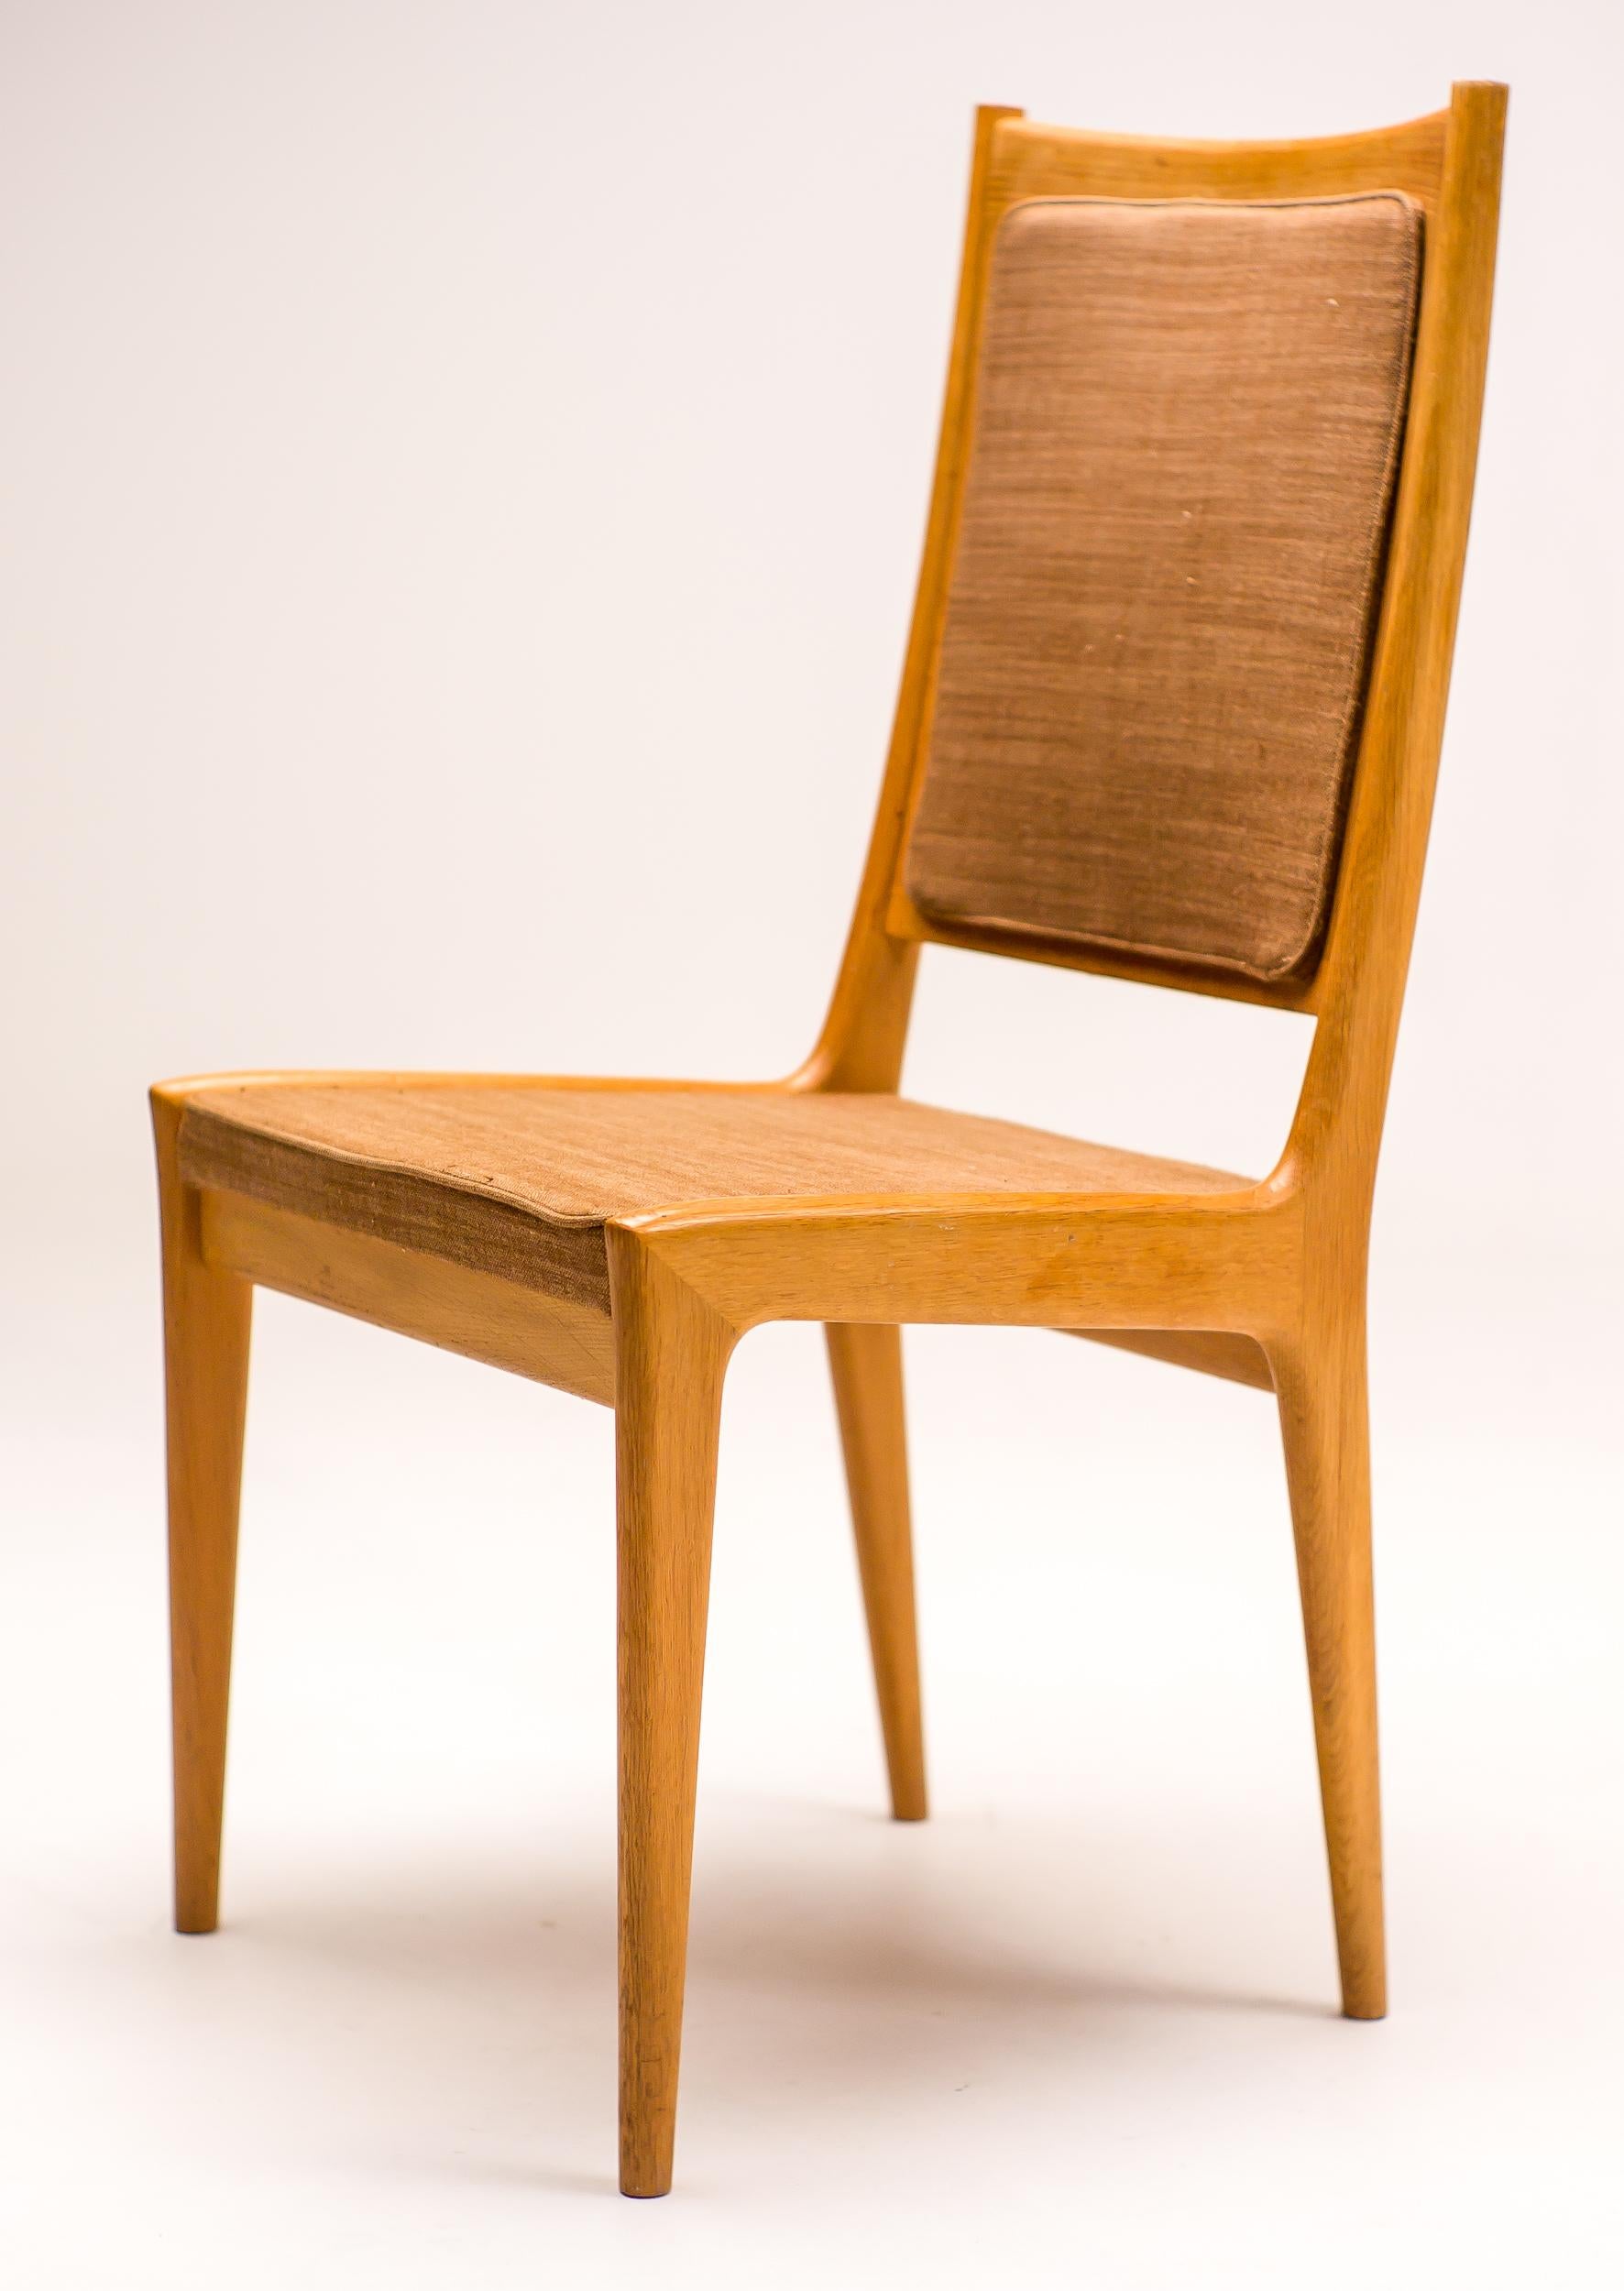 Beautiful set of 6 dining chairs designed by Karl Erik Ekselius for JOC.
Elegantly carved teak frames with the original light brown fabric.
The original foam was completely deteriorated, and was carefully replaced with new foam by our